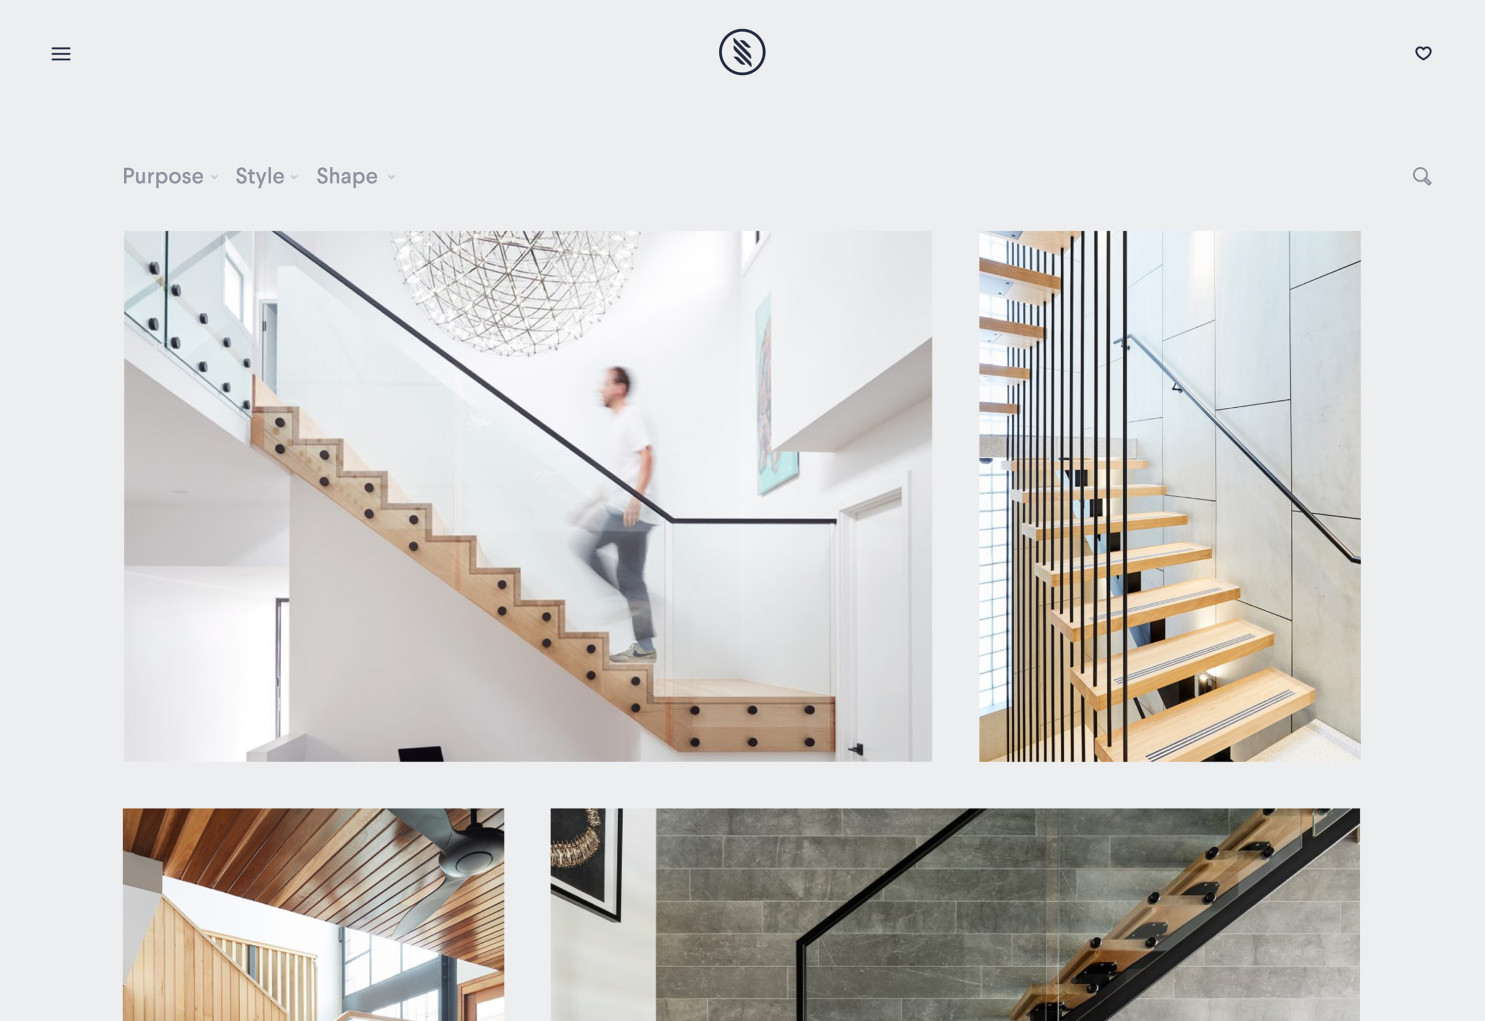 S&A Stairs - Website